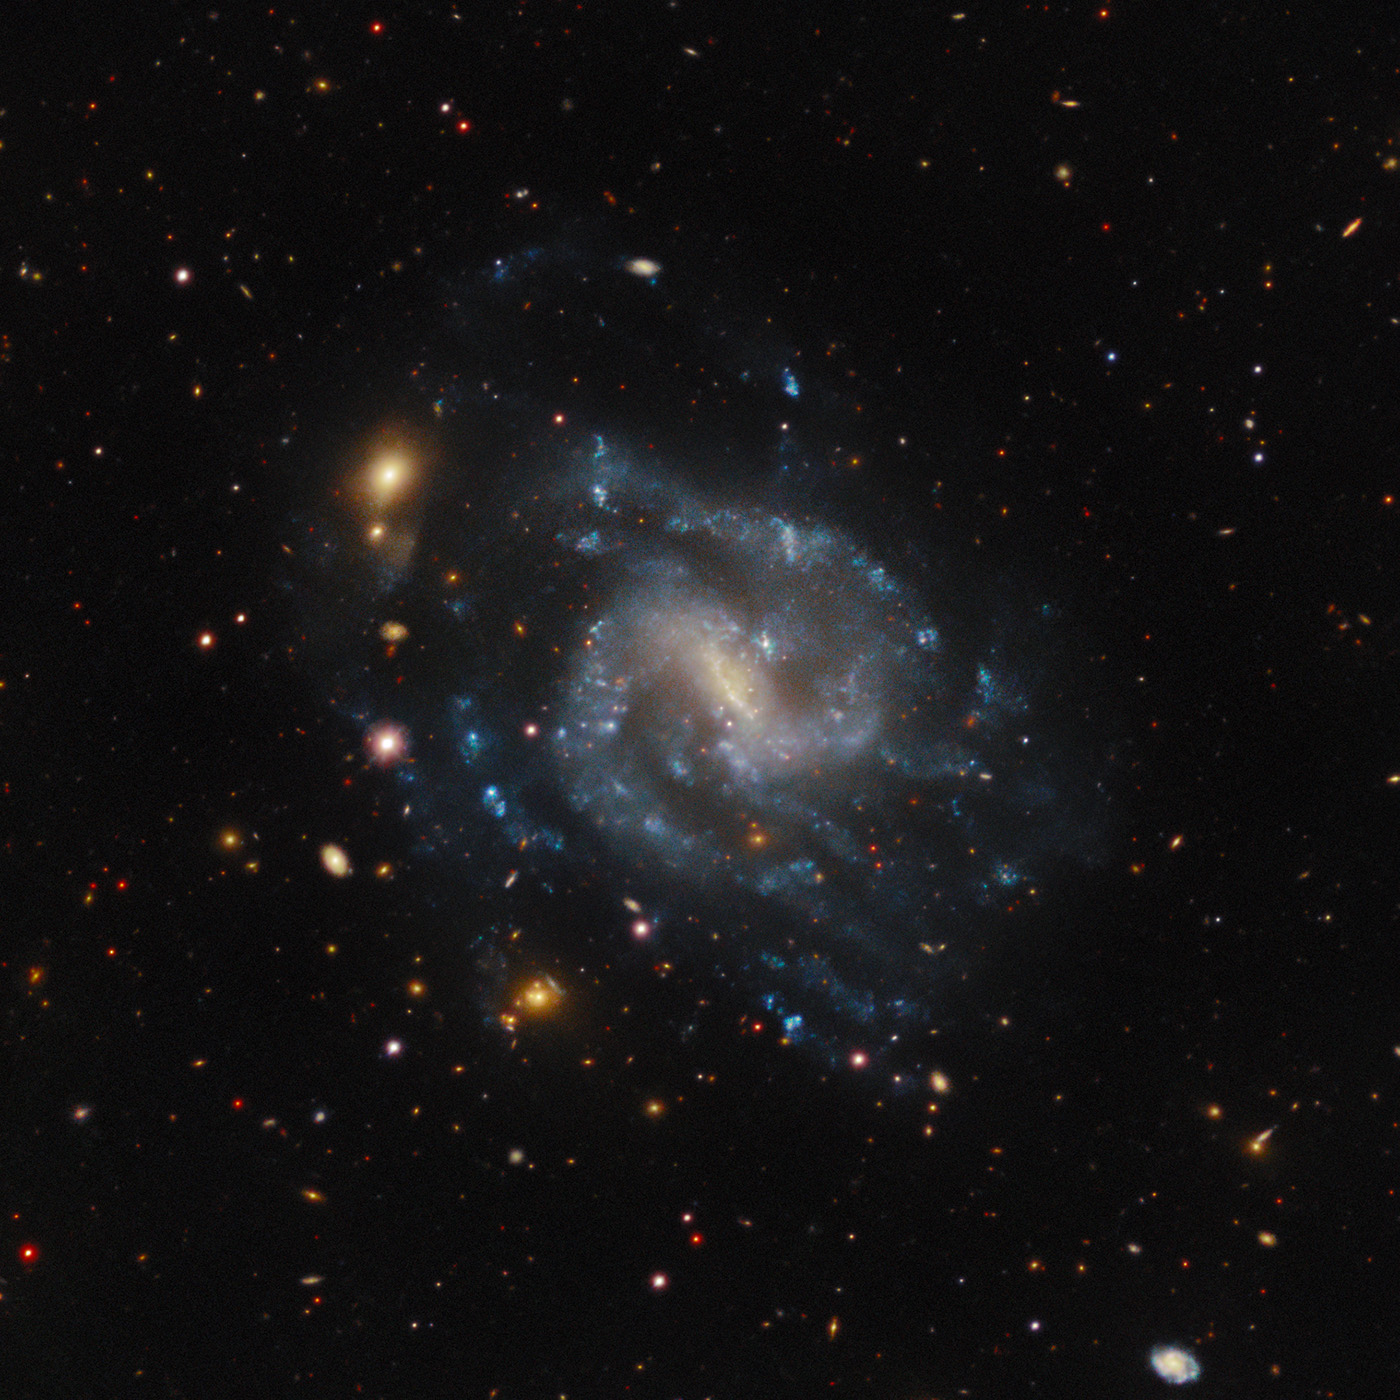 IC 4212, a barred spiral galaxy located in the constellation Virgo.